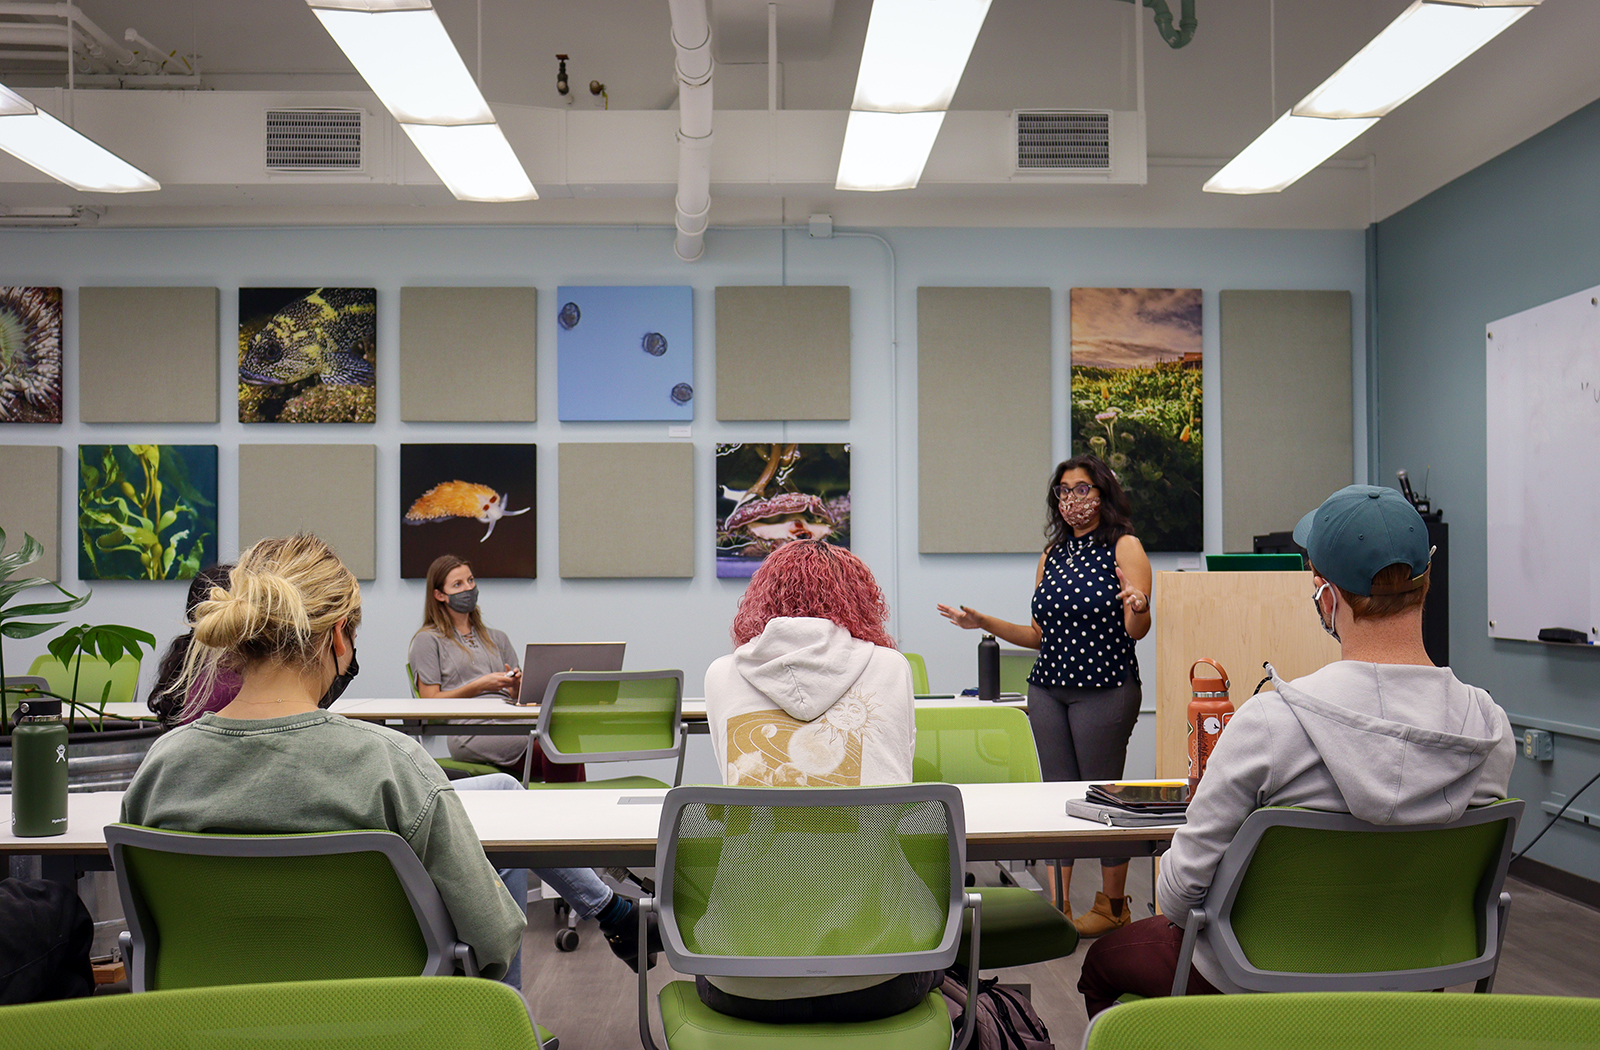 Meghan Zulian (seated, furthest row from the camera) observes as Priya Shukla (standing) gives a guest lecture on science writing for the Fall 2021 Professional Development Class.